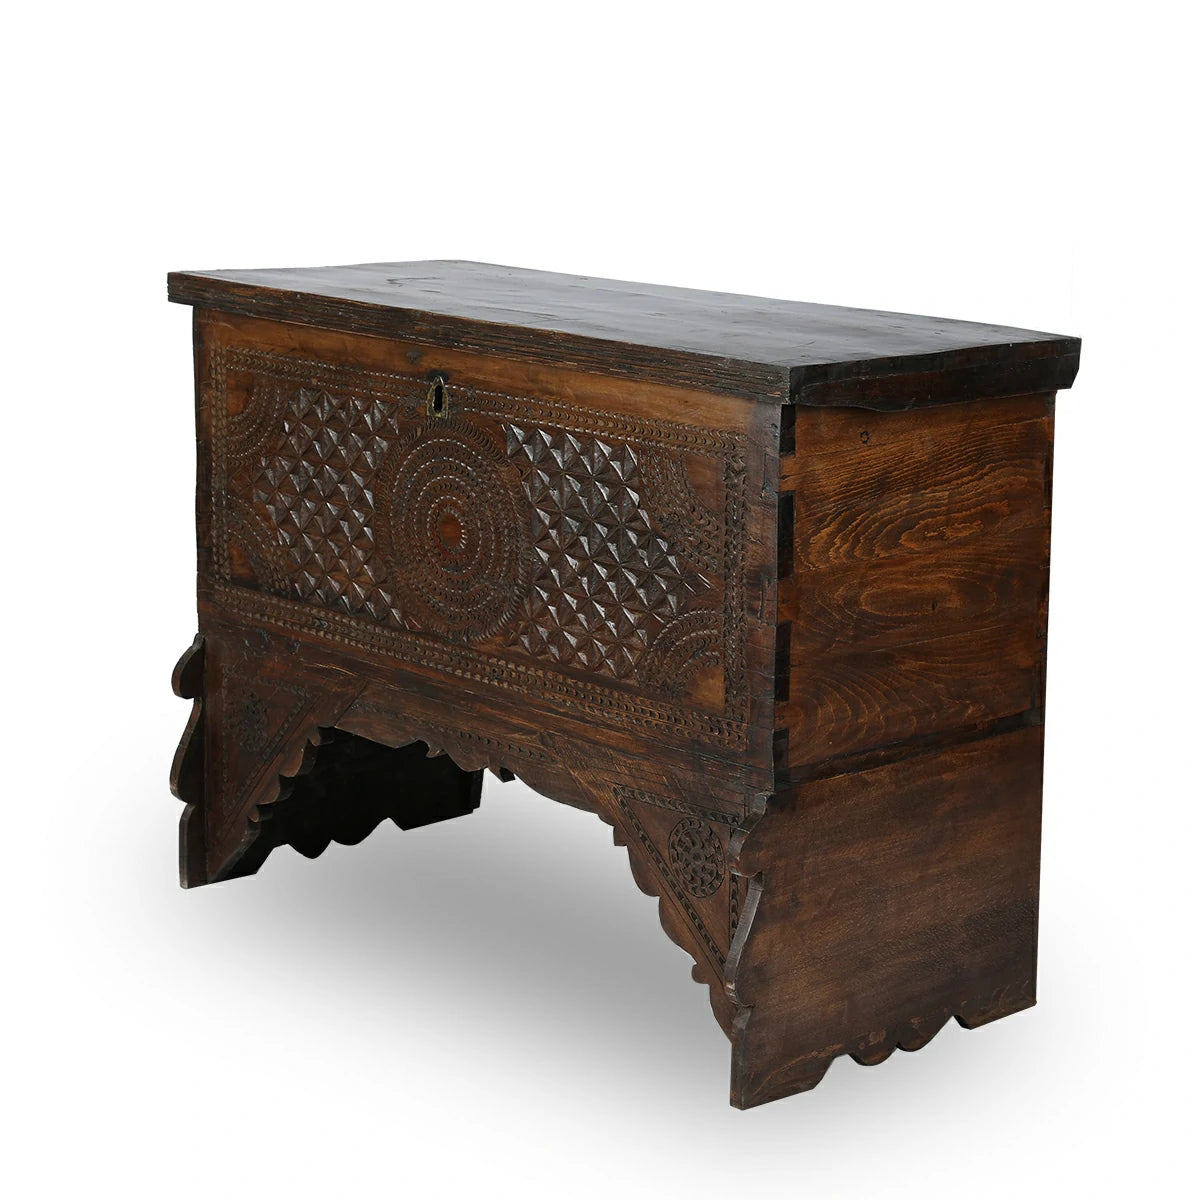 Antique Solid Wood Storage Chest with Traditional Carvings in Moorish Pattern